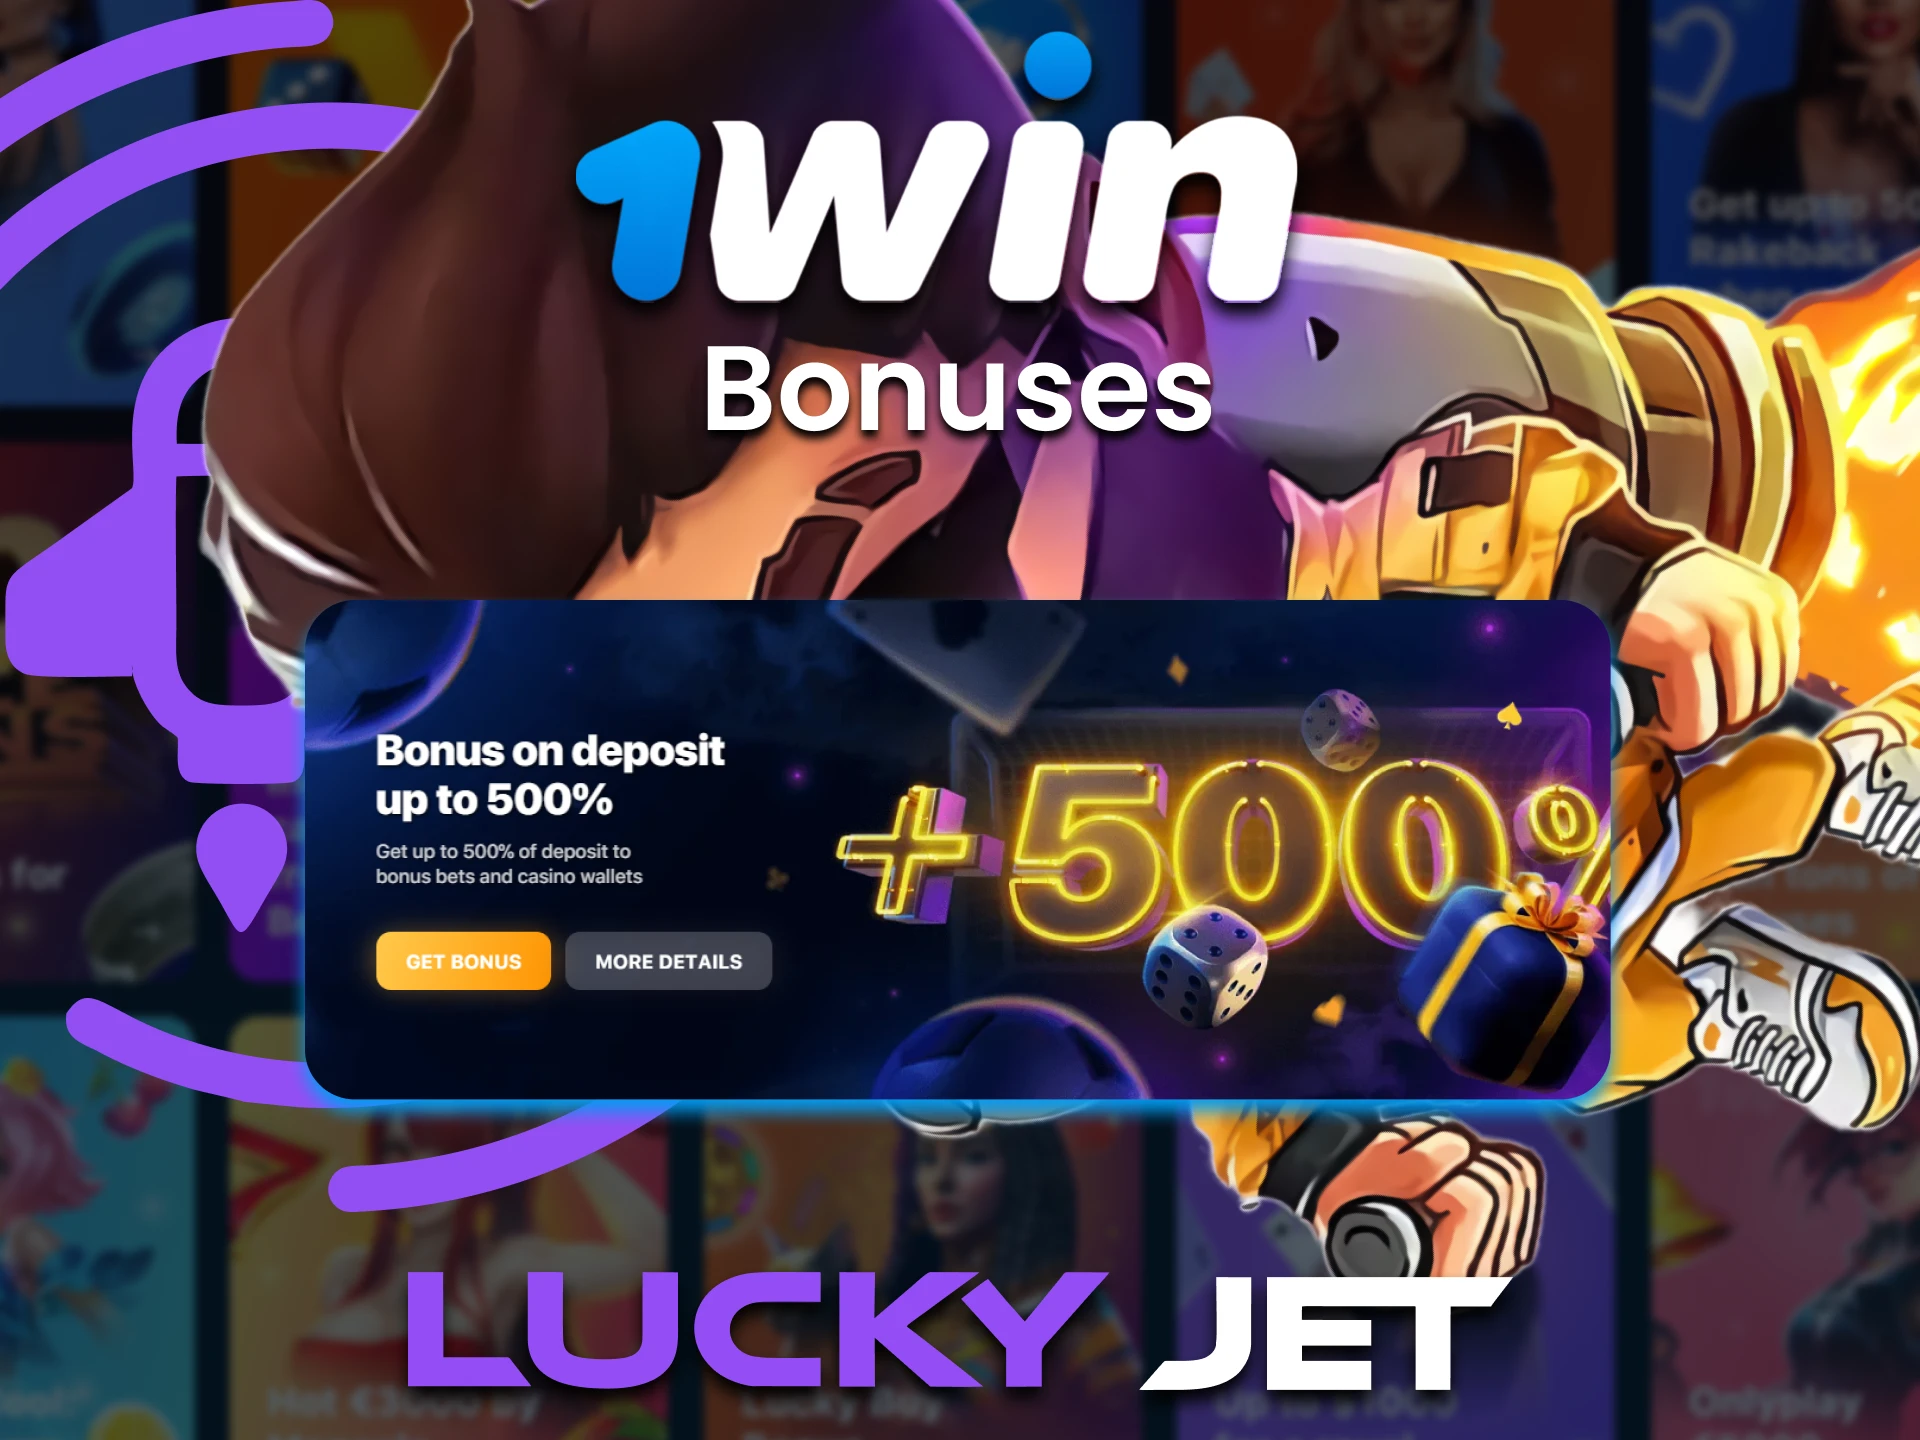 Get a special bonus for playing Lucky Jet from 1win.